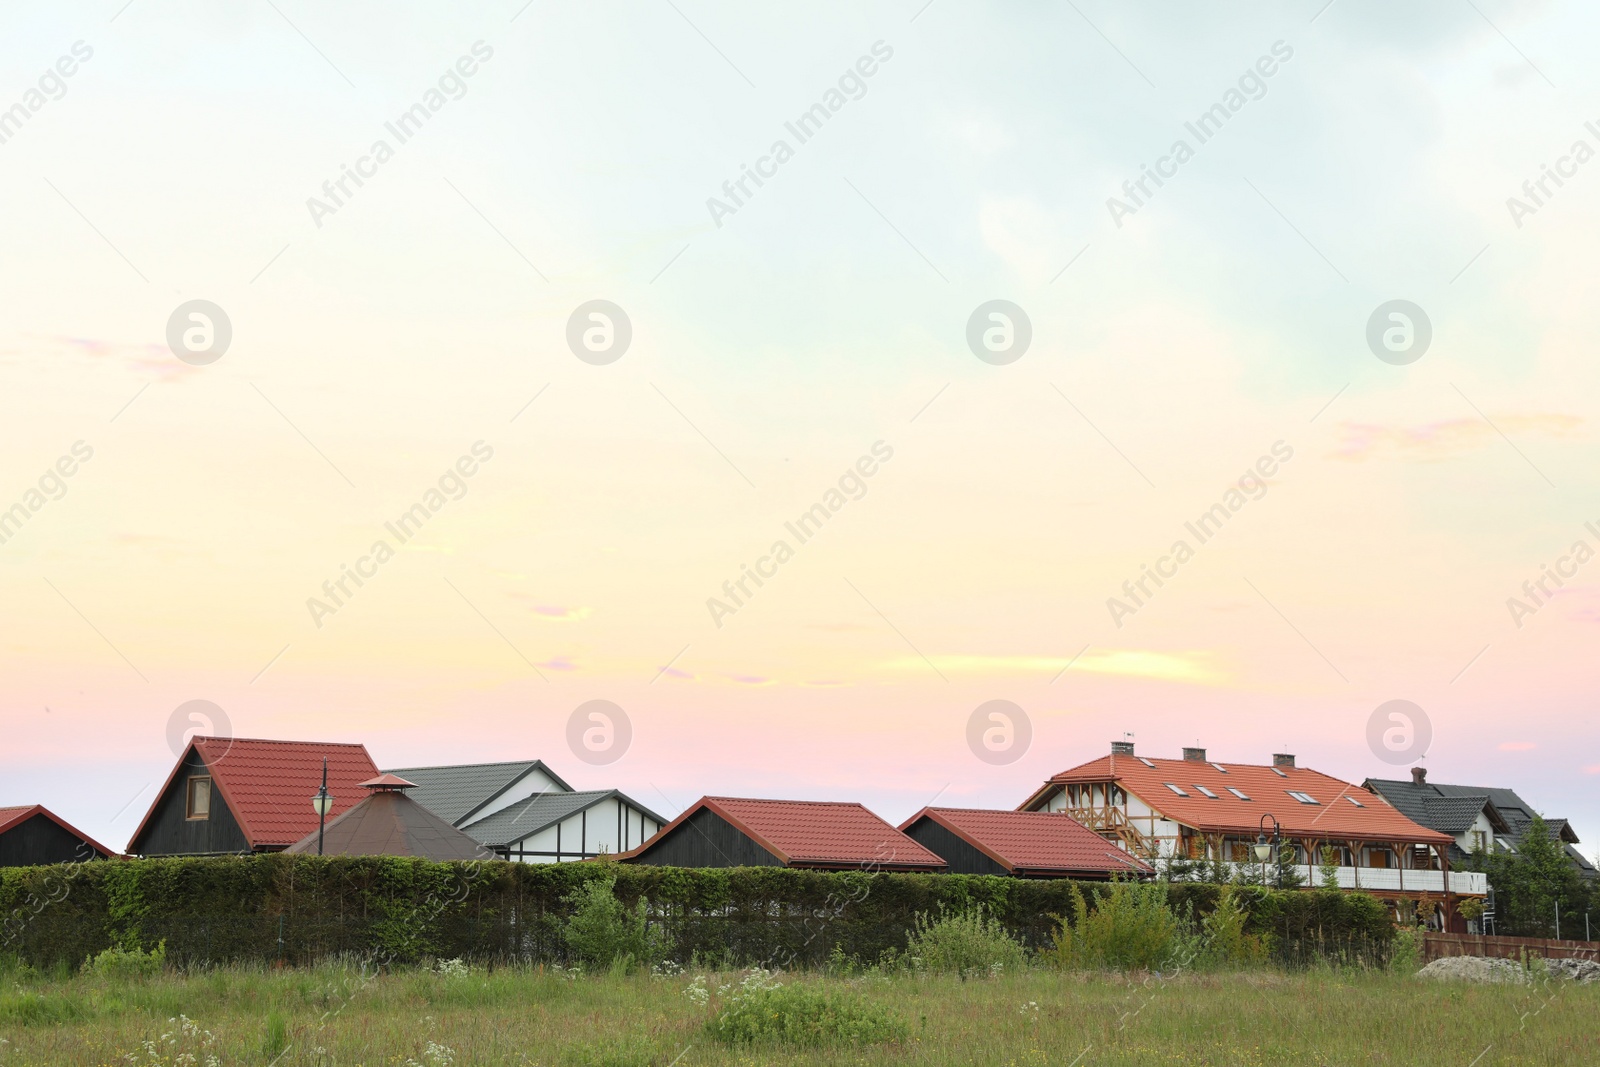 Photo of Modern buildings with different roofs outdoors on spring day